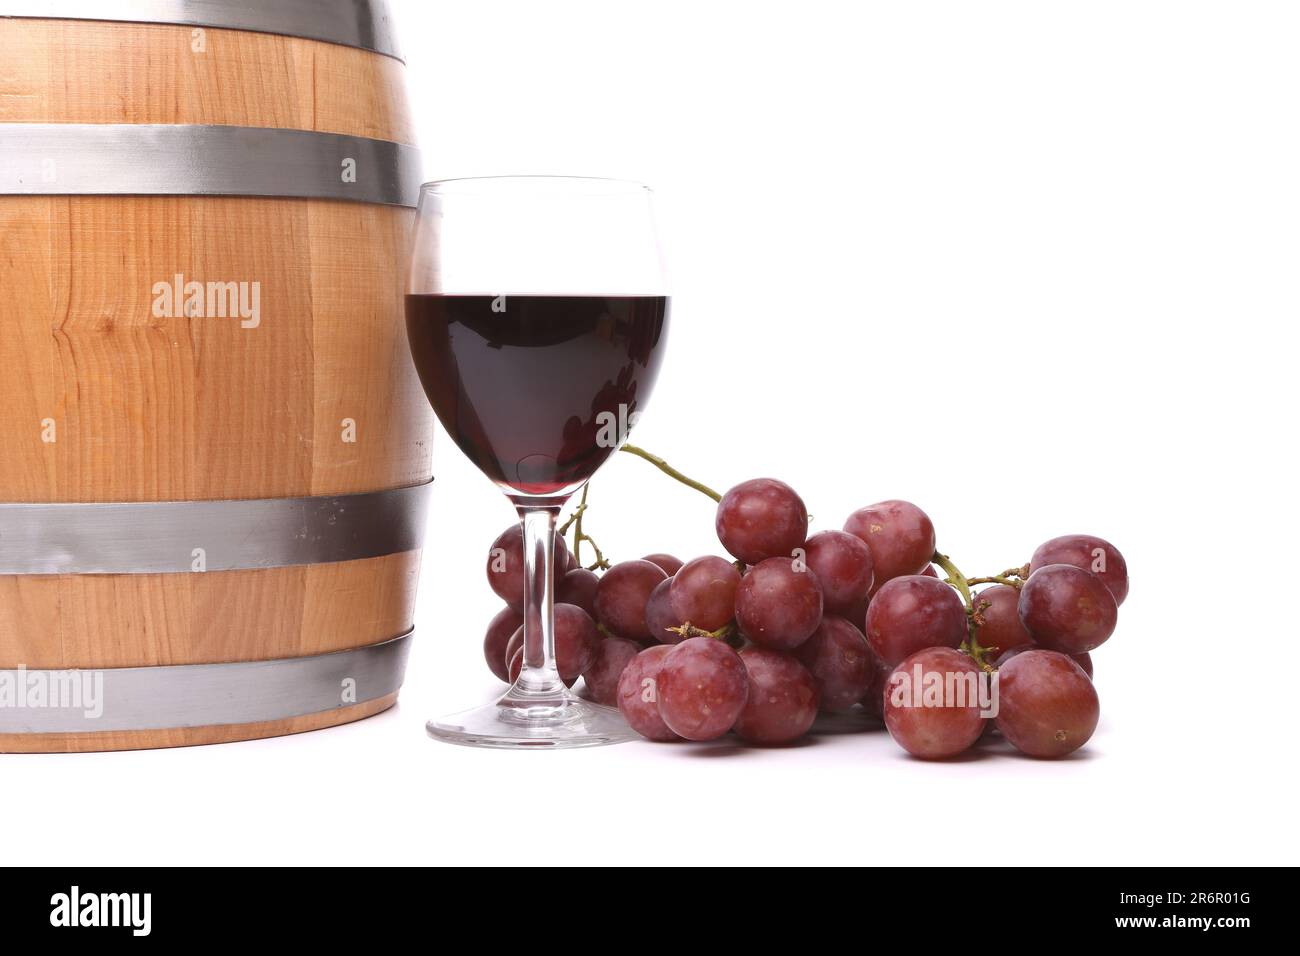 A glass of red wine with grapes and barrel on the white background. Stock Photo